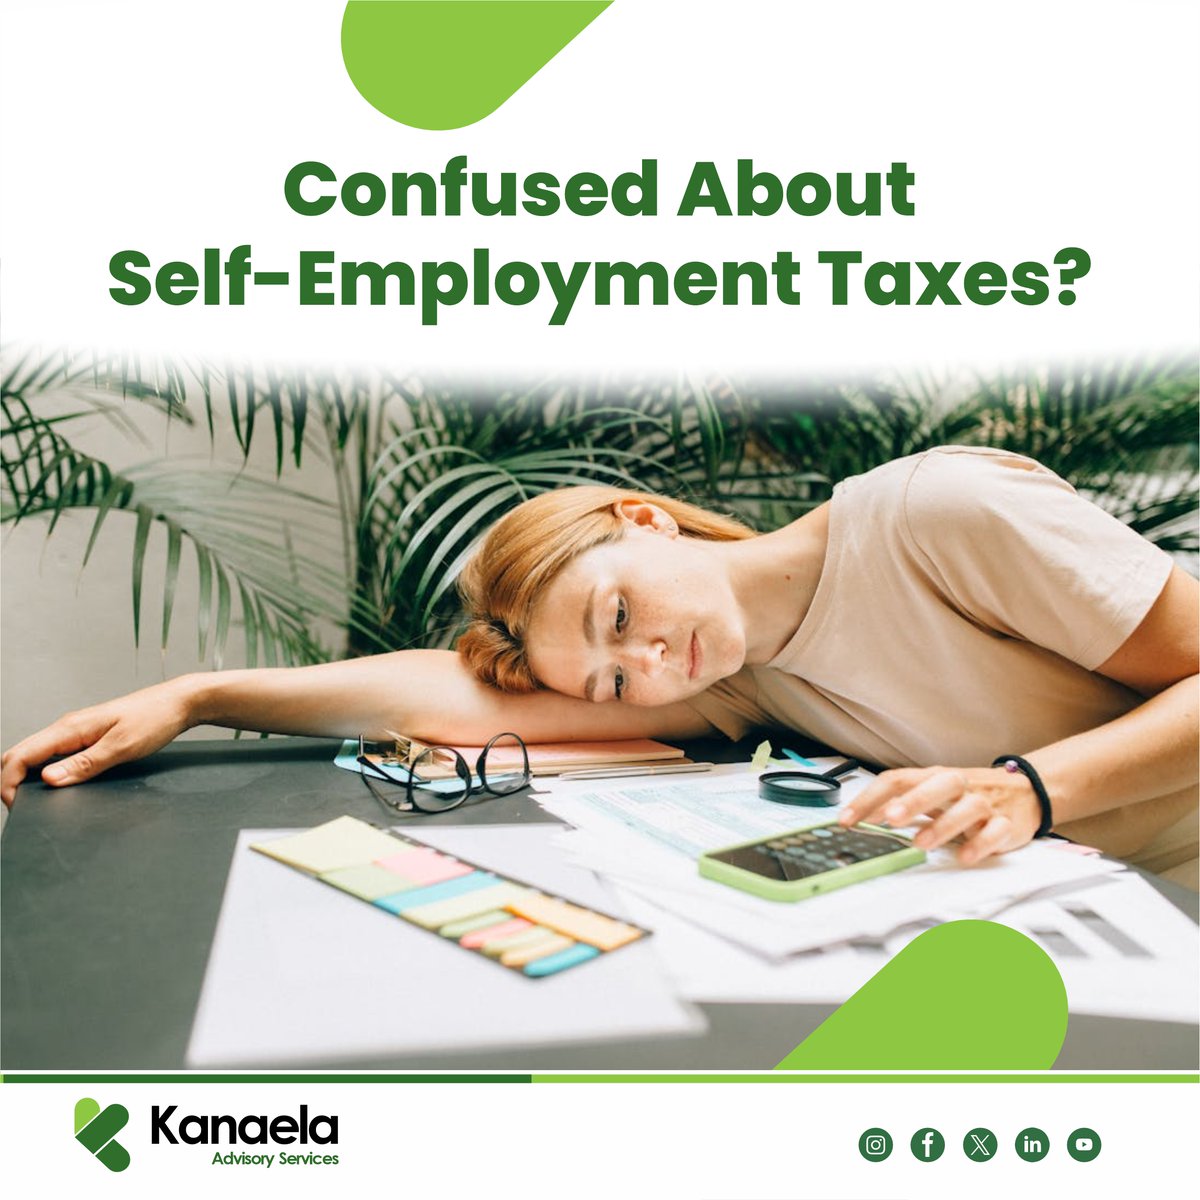 Don't go it alone! Kanaela Advisory Services can help you navigate the complexities of self-employment taxes and ensure you're filing everything correctly. 

#selfemployed #taxes #bookkeeping